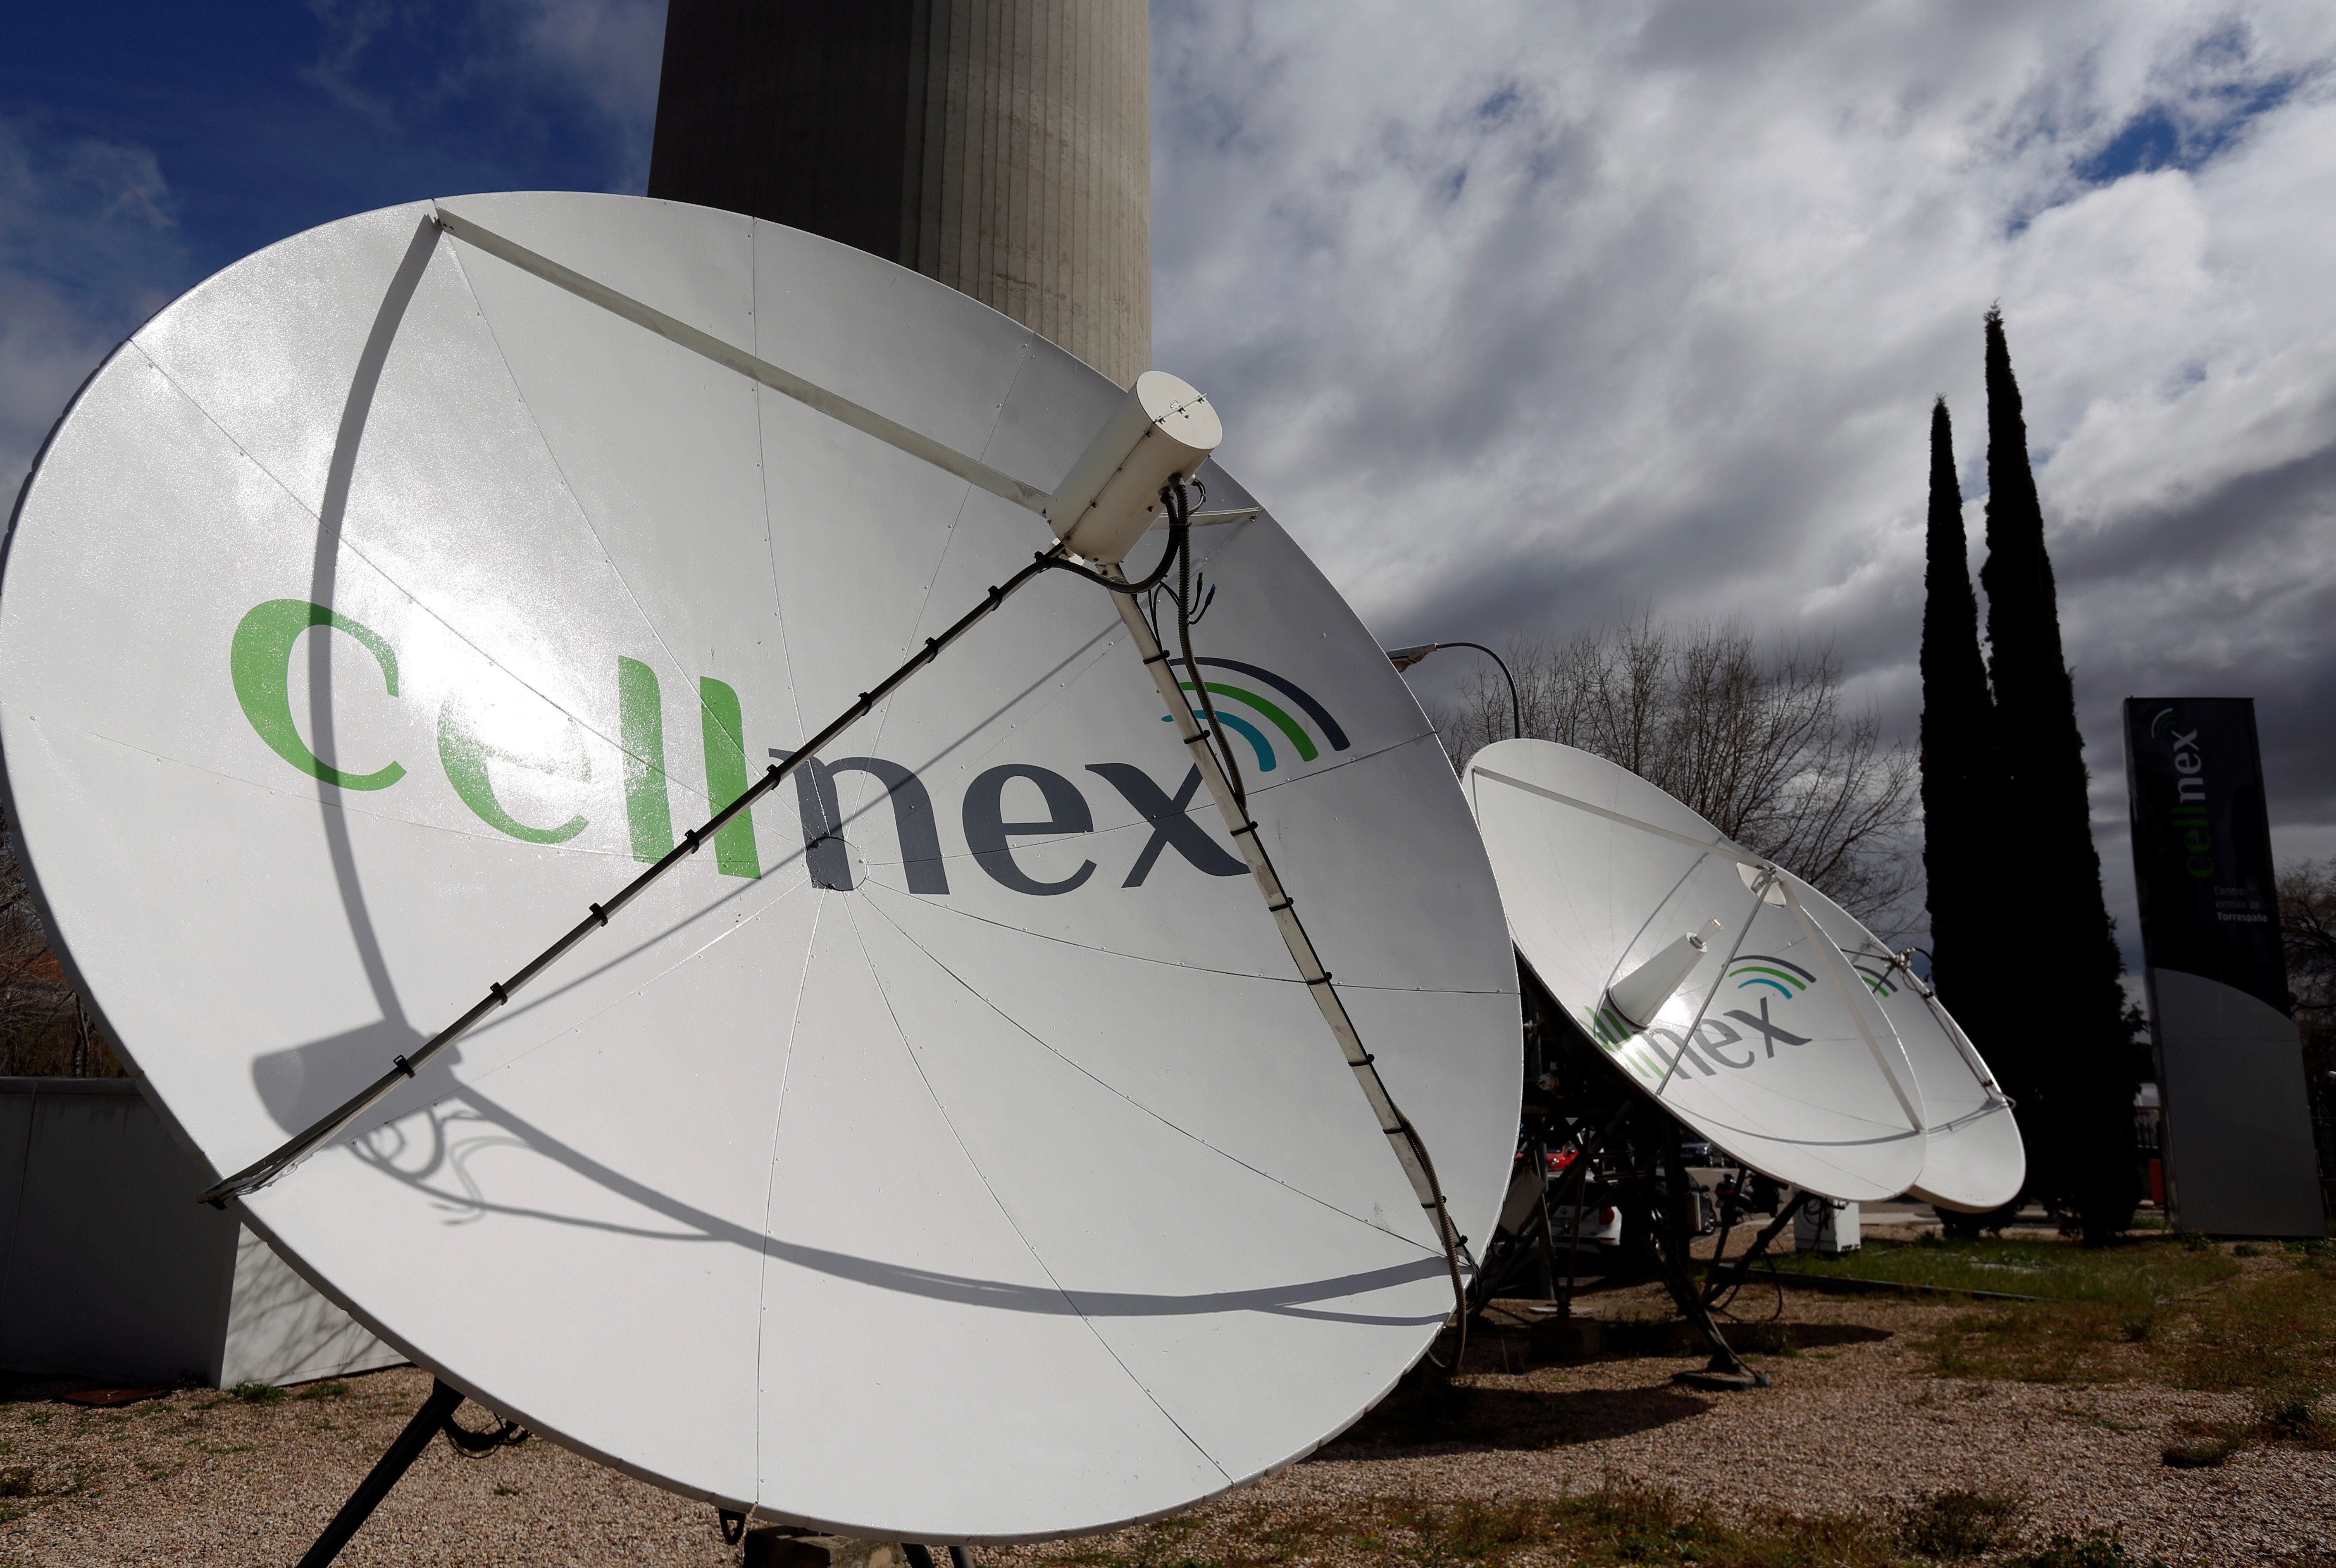 Cellnex equipment at a site in Madrid. If the deal goes ahead, it will allow the company to enter new markets such as Austria, Denmark and Sweden. Photo: Reuters